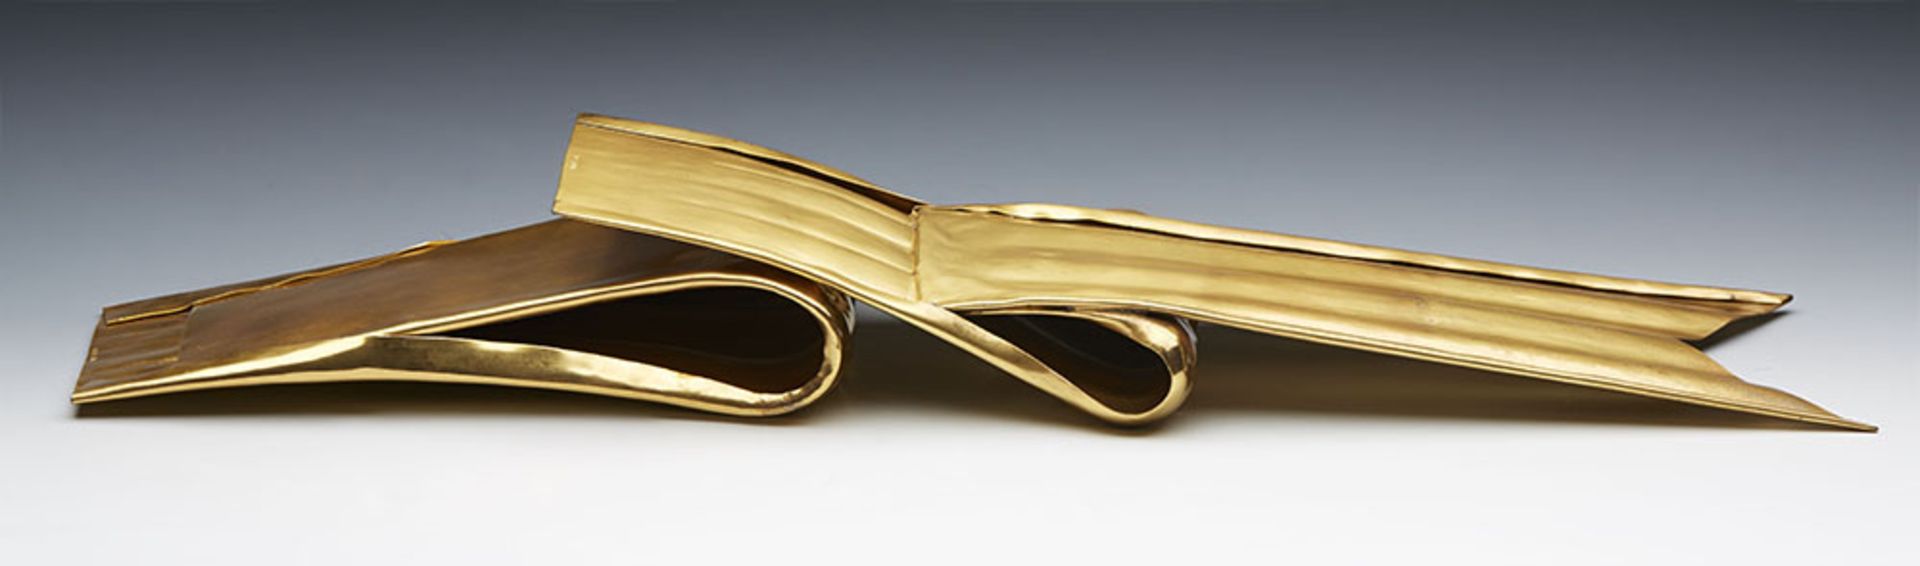 Dulany Studio Gilt Metal Bow By Helen Hughes Early 20Th C. - Image 9 of 11